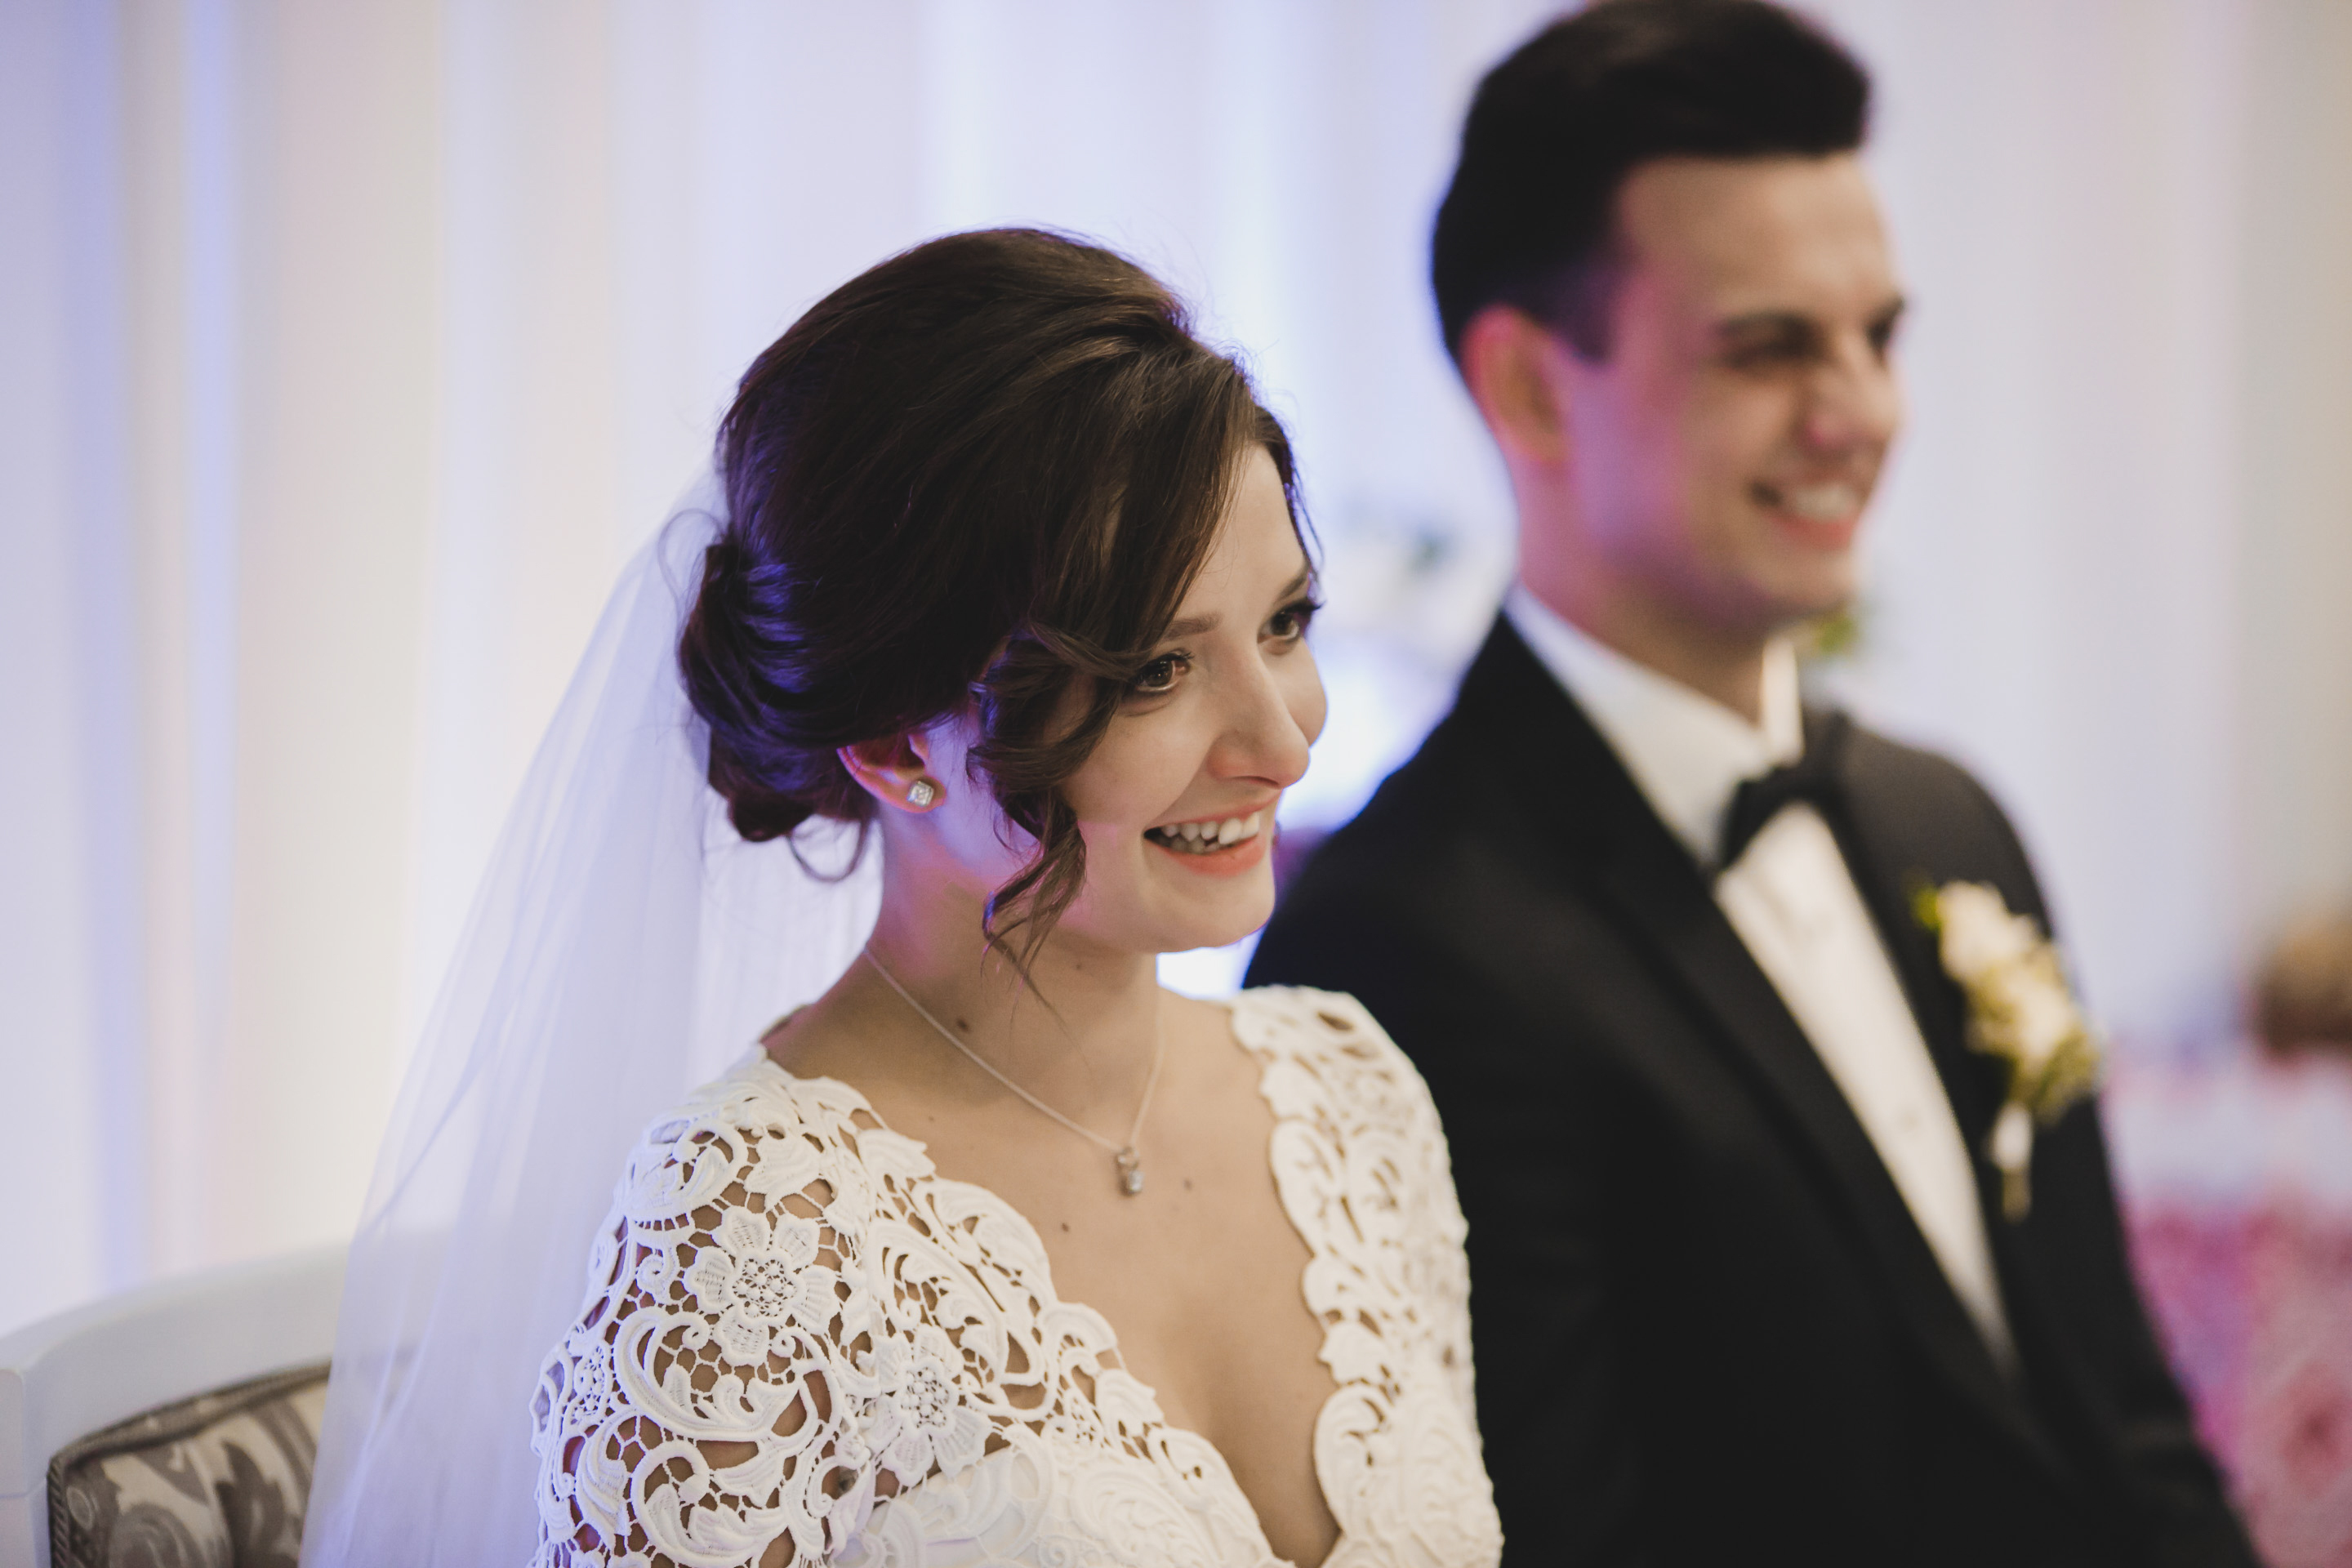 A young couple smiling on their wedding day | Source: Shutterstock